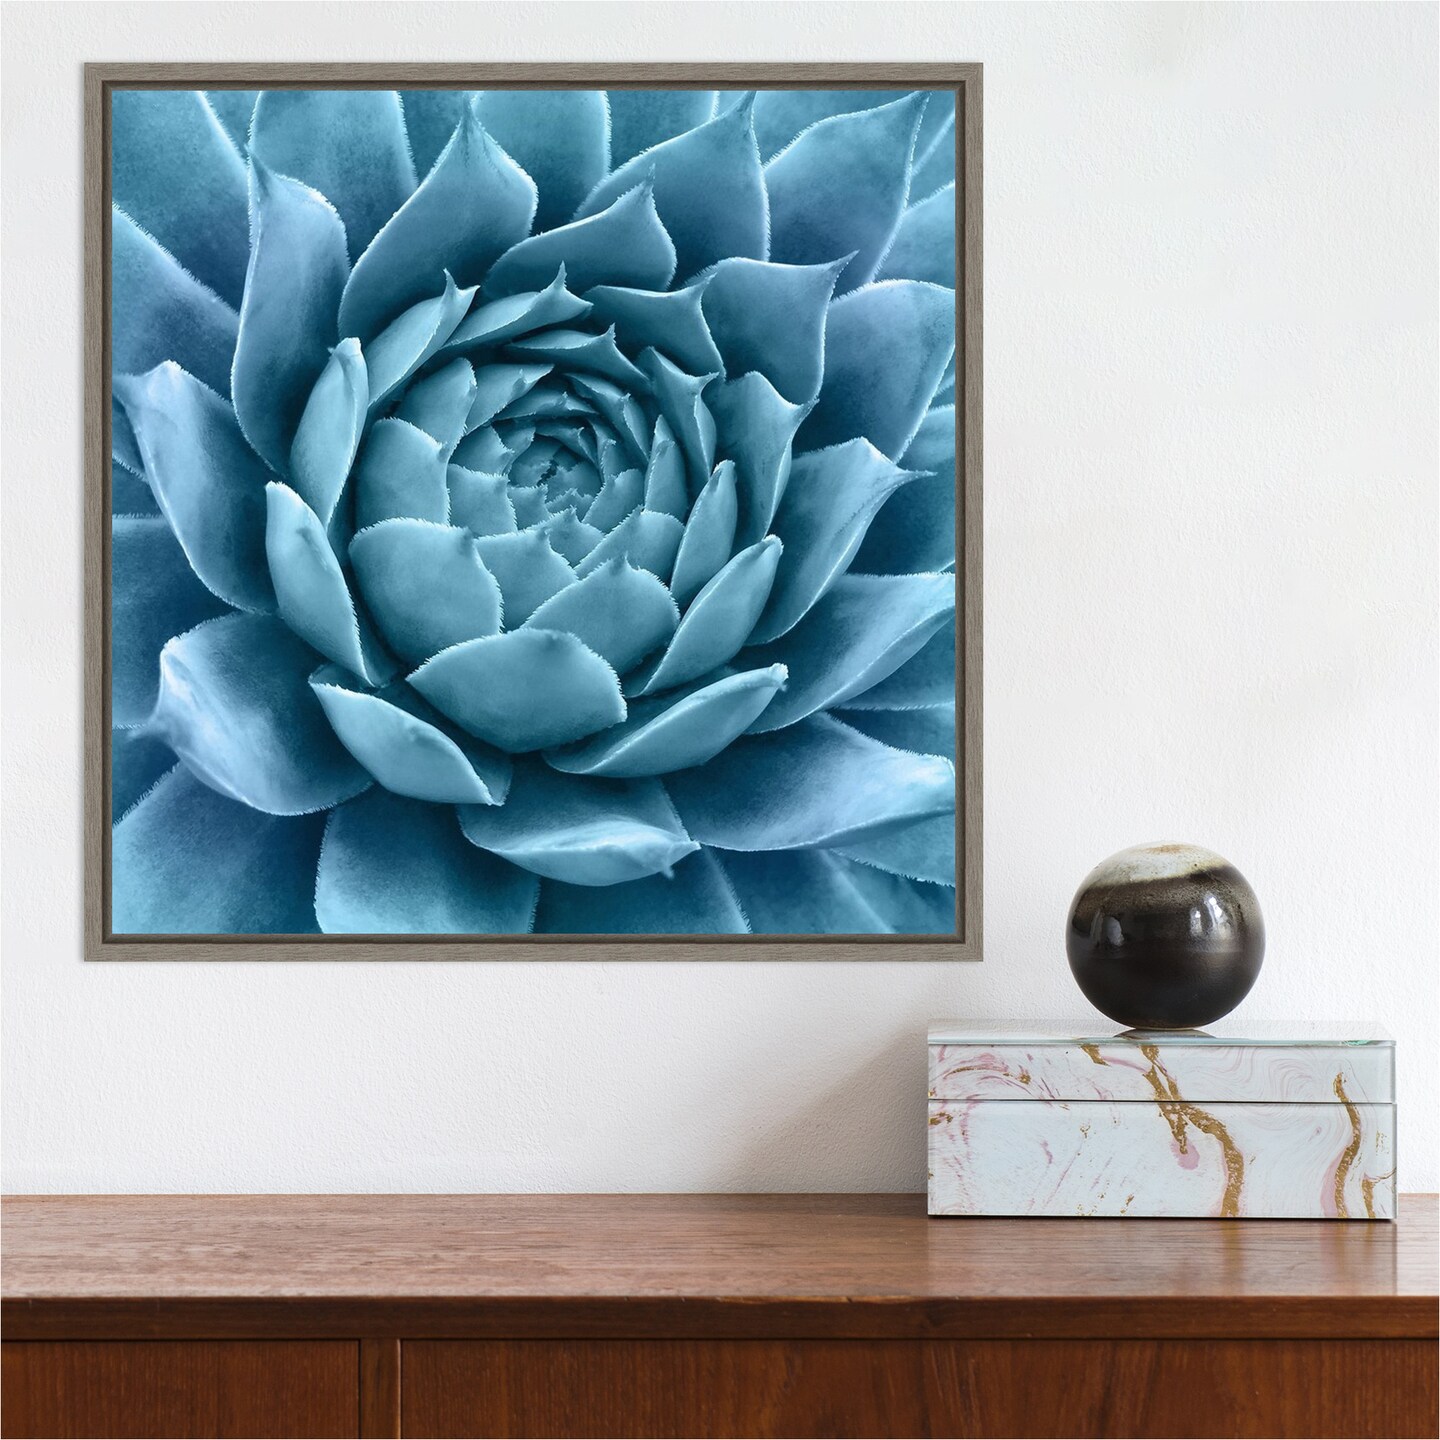 Silvery Blue Agave by Jan Bell 16-in. W x 16-in. H. Canvas Wall Art Print Framed in Grey